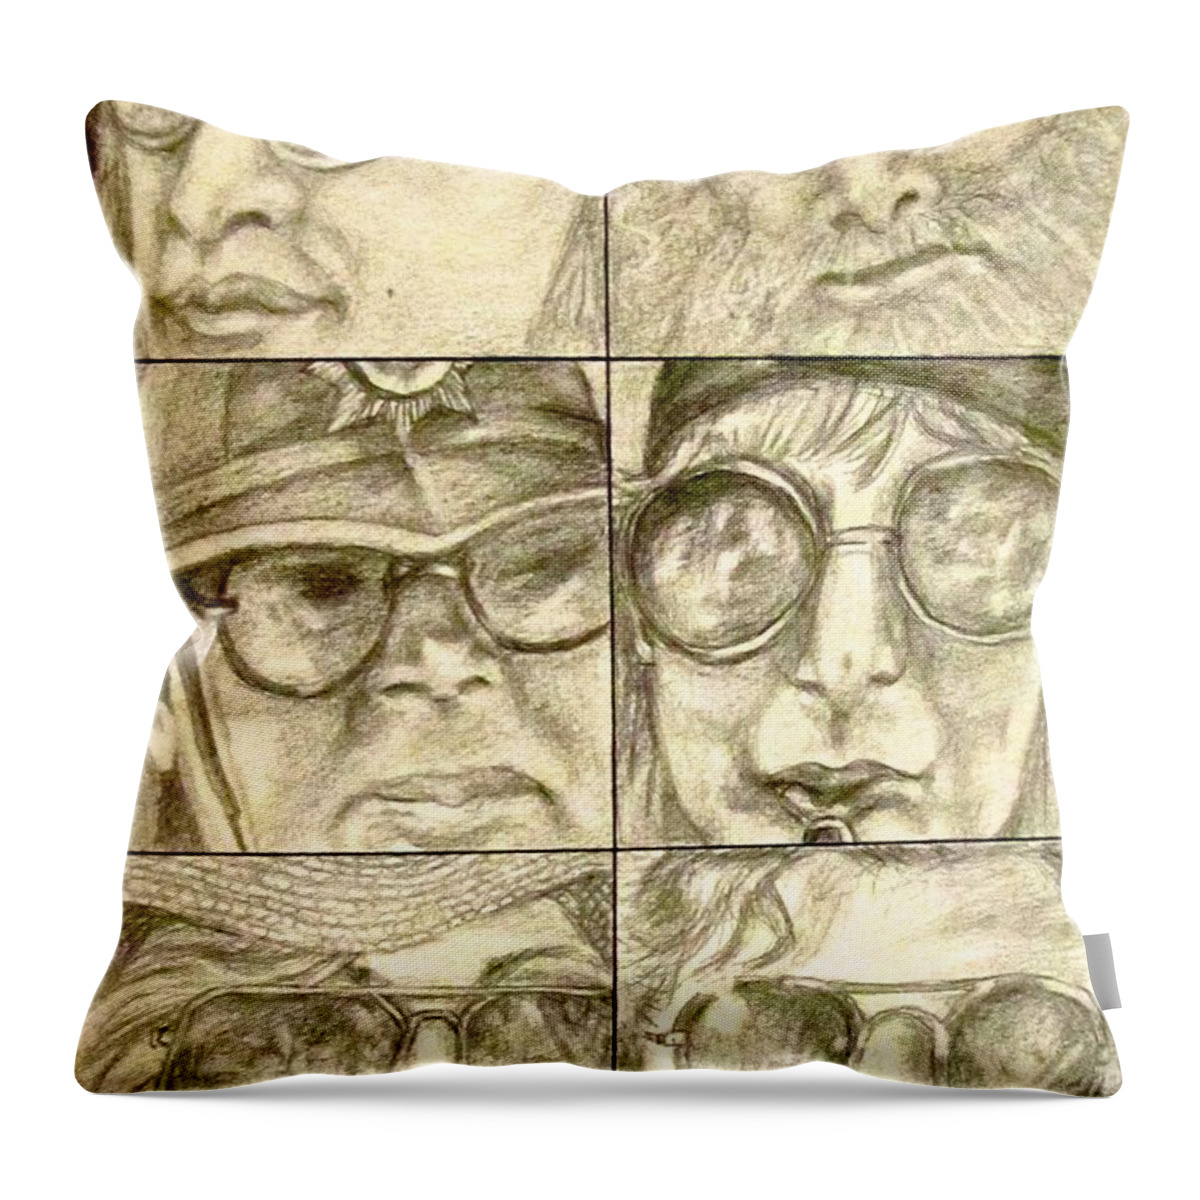 Man Throw Pillow featuring the drawing Sunglasses by Barbara O'Toole